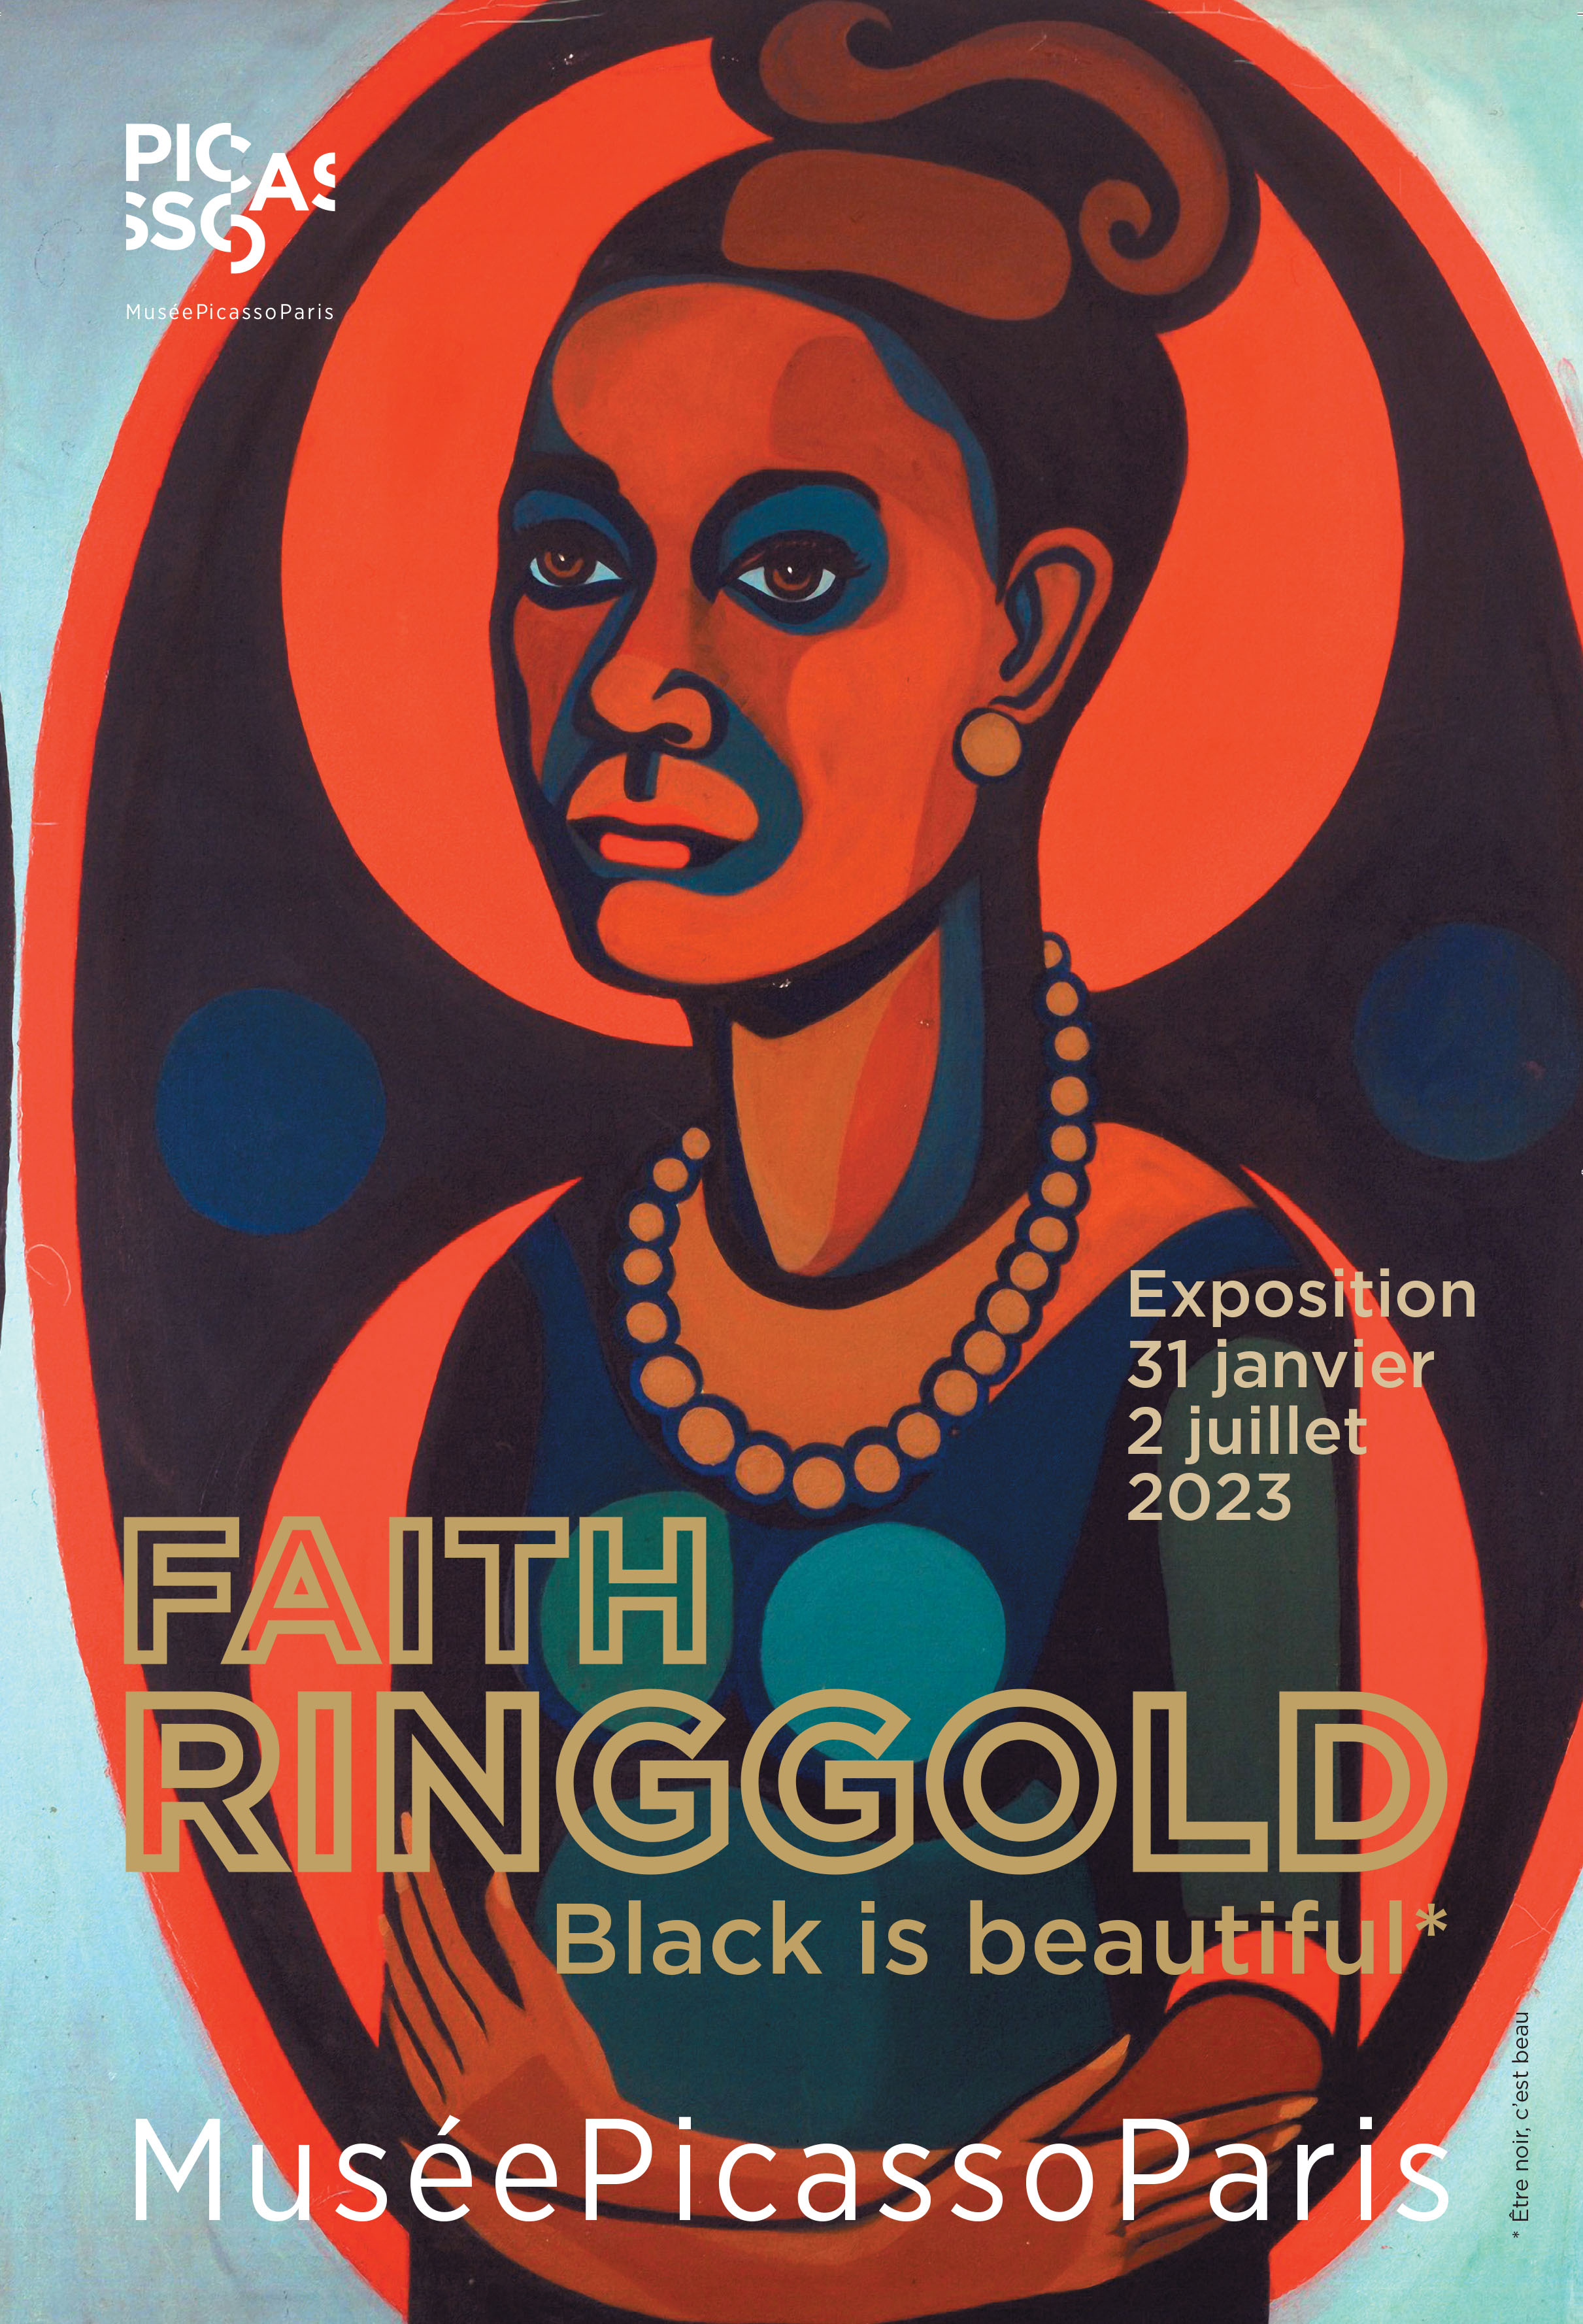 Affiche Faith Ringgold Black is beautiful 